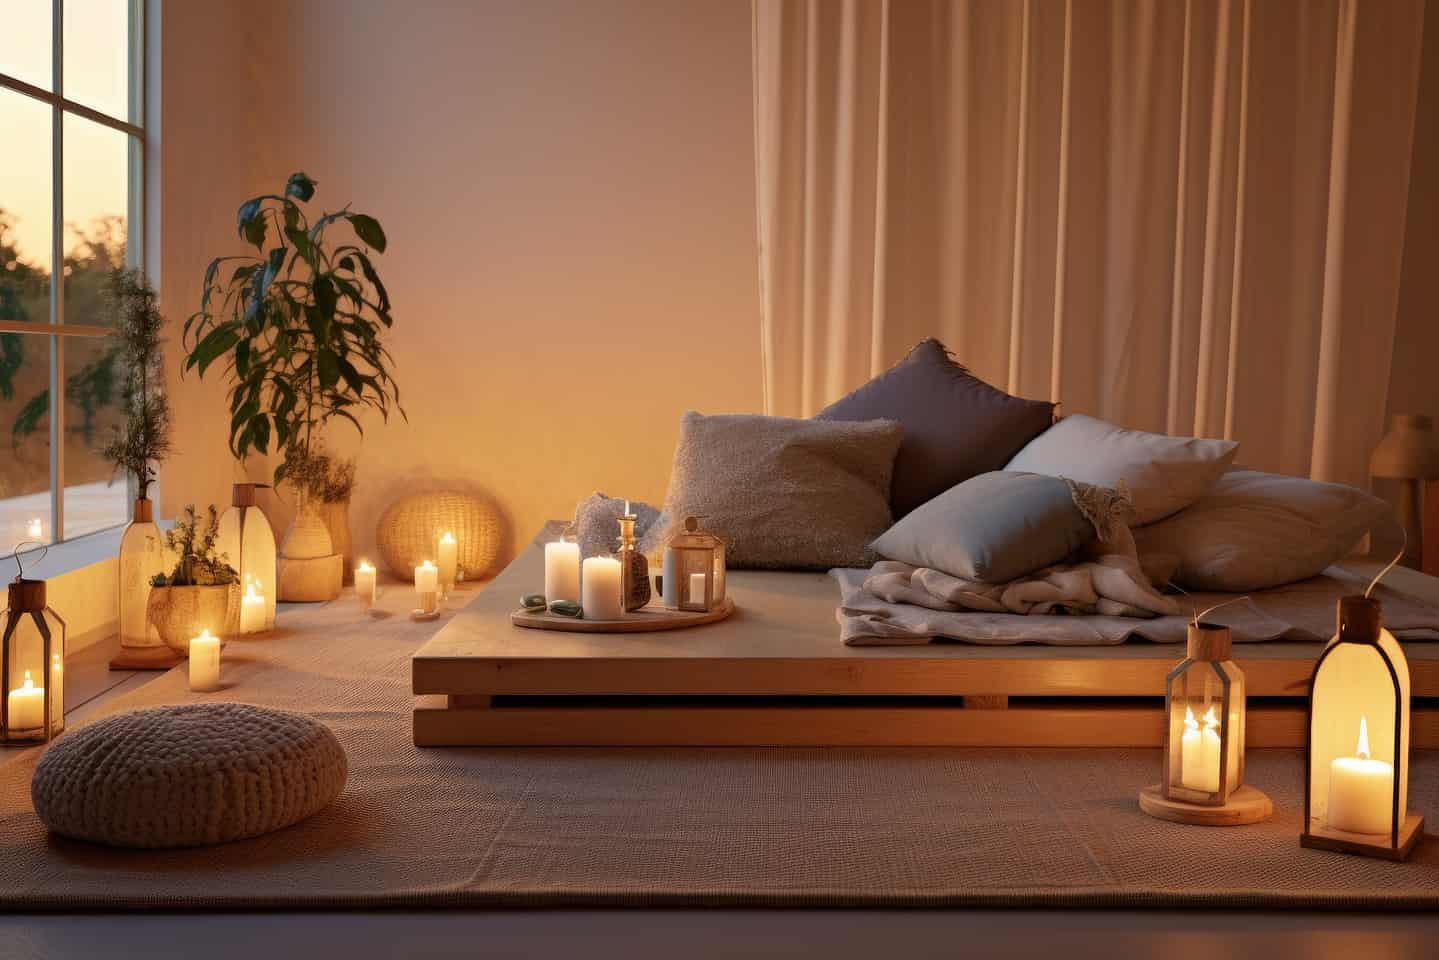 Enhance your meditation space with these décor accessories